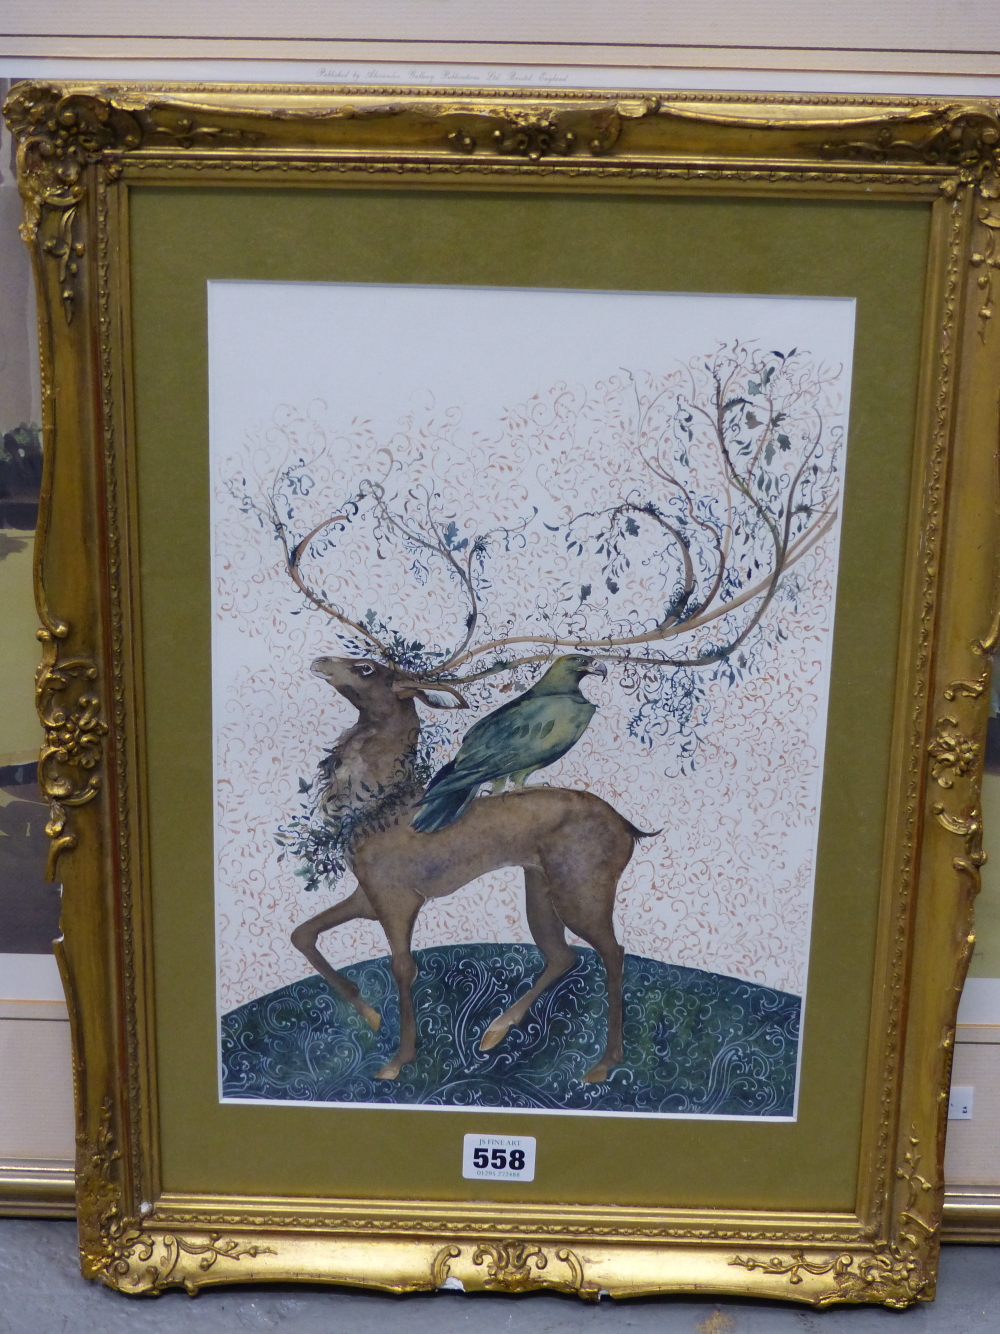 JACKIE MORRIS (20TH/21ST CENTURY) ARR, STAG AND EAGLE, WATERCOLOUR HIGHLIGHTED WITH GILT, 24.5 x - Image 3 of 8